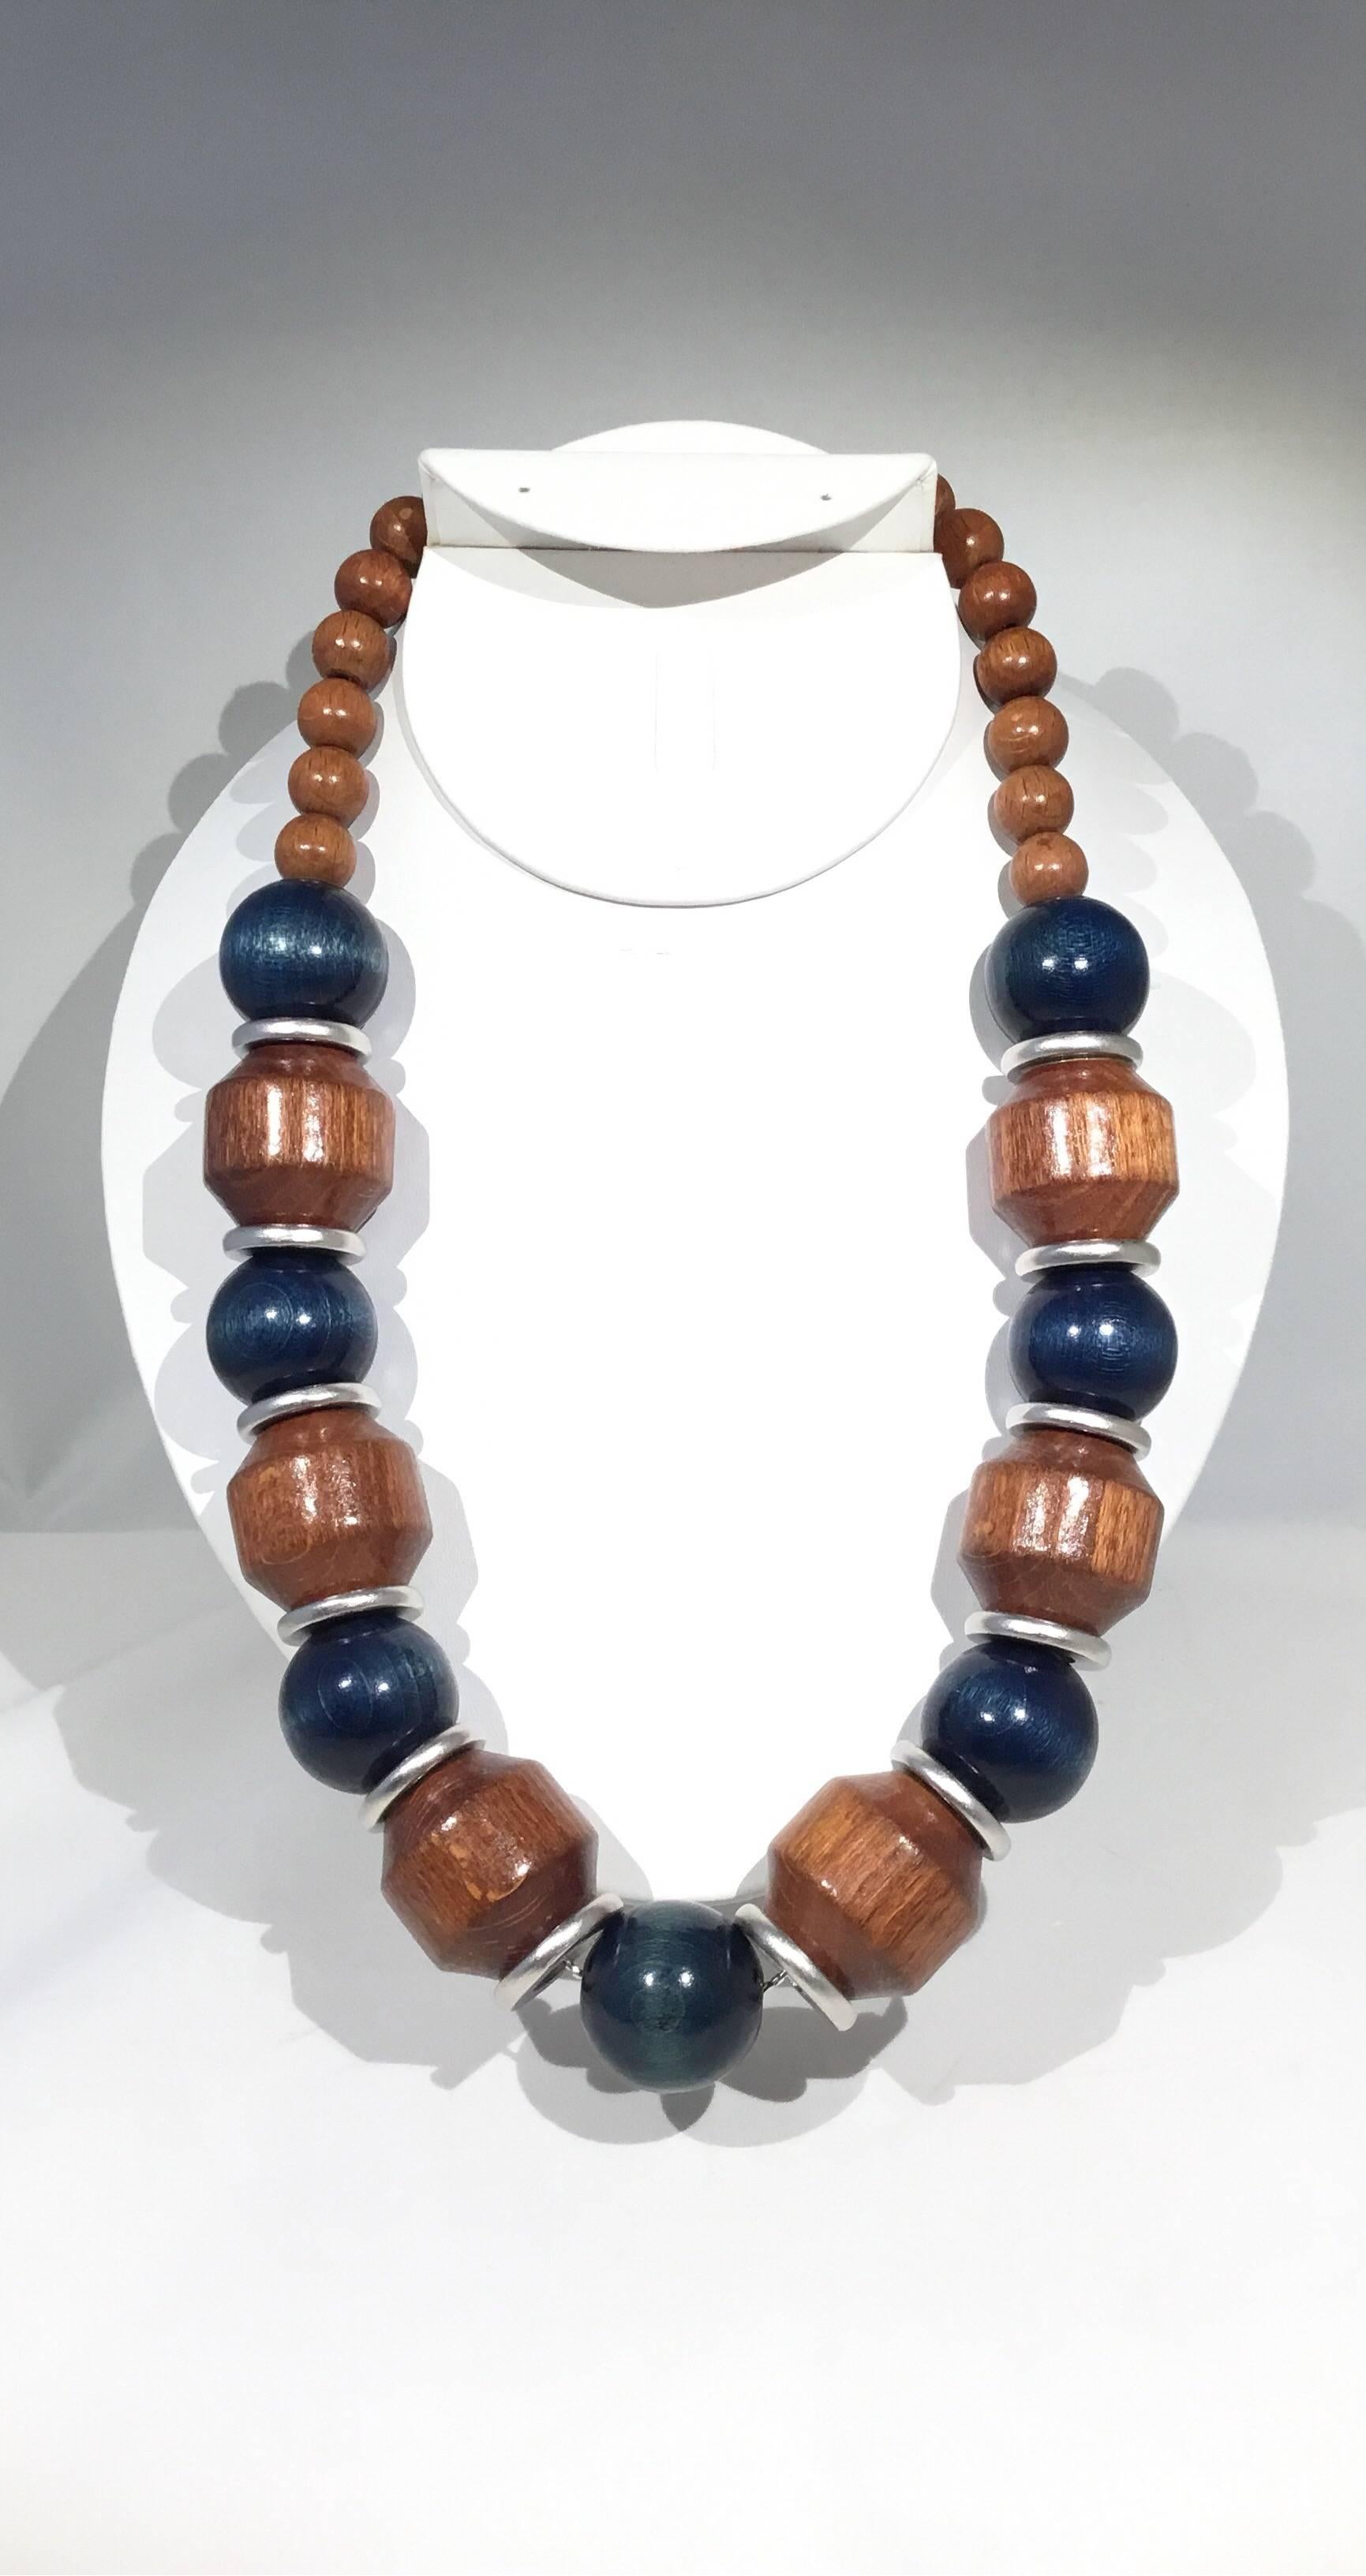 YSL vintage wood necklace has silver-tone rings, Natural and blue wood beads with a hook closure. YSL signature clasp. Necklace measures approximately 23 inches. Excellent condition.